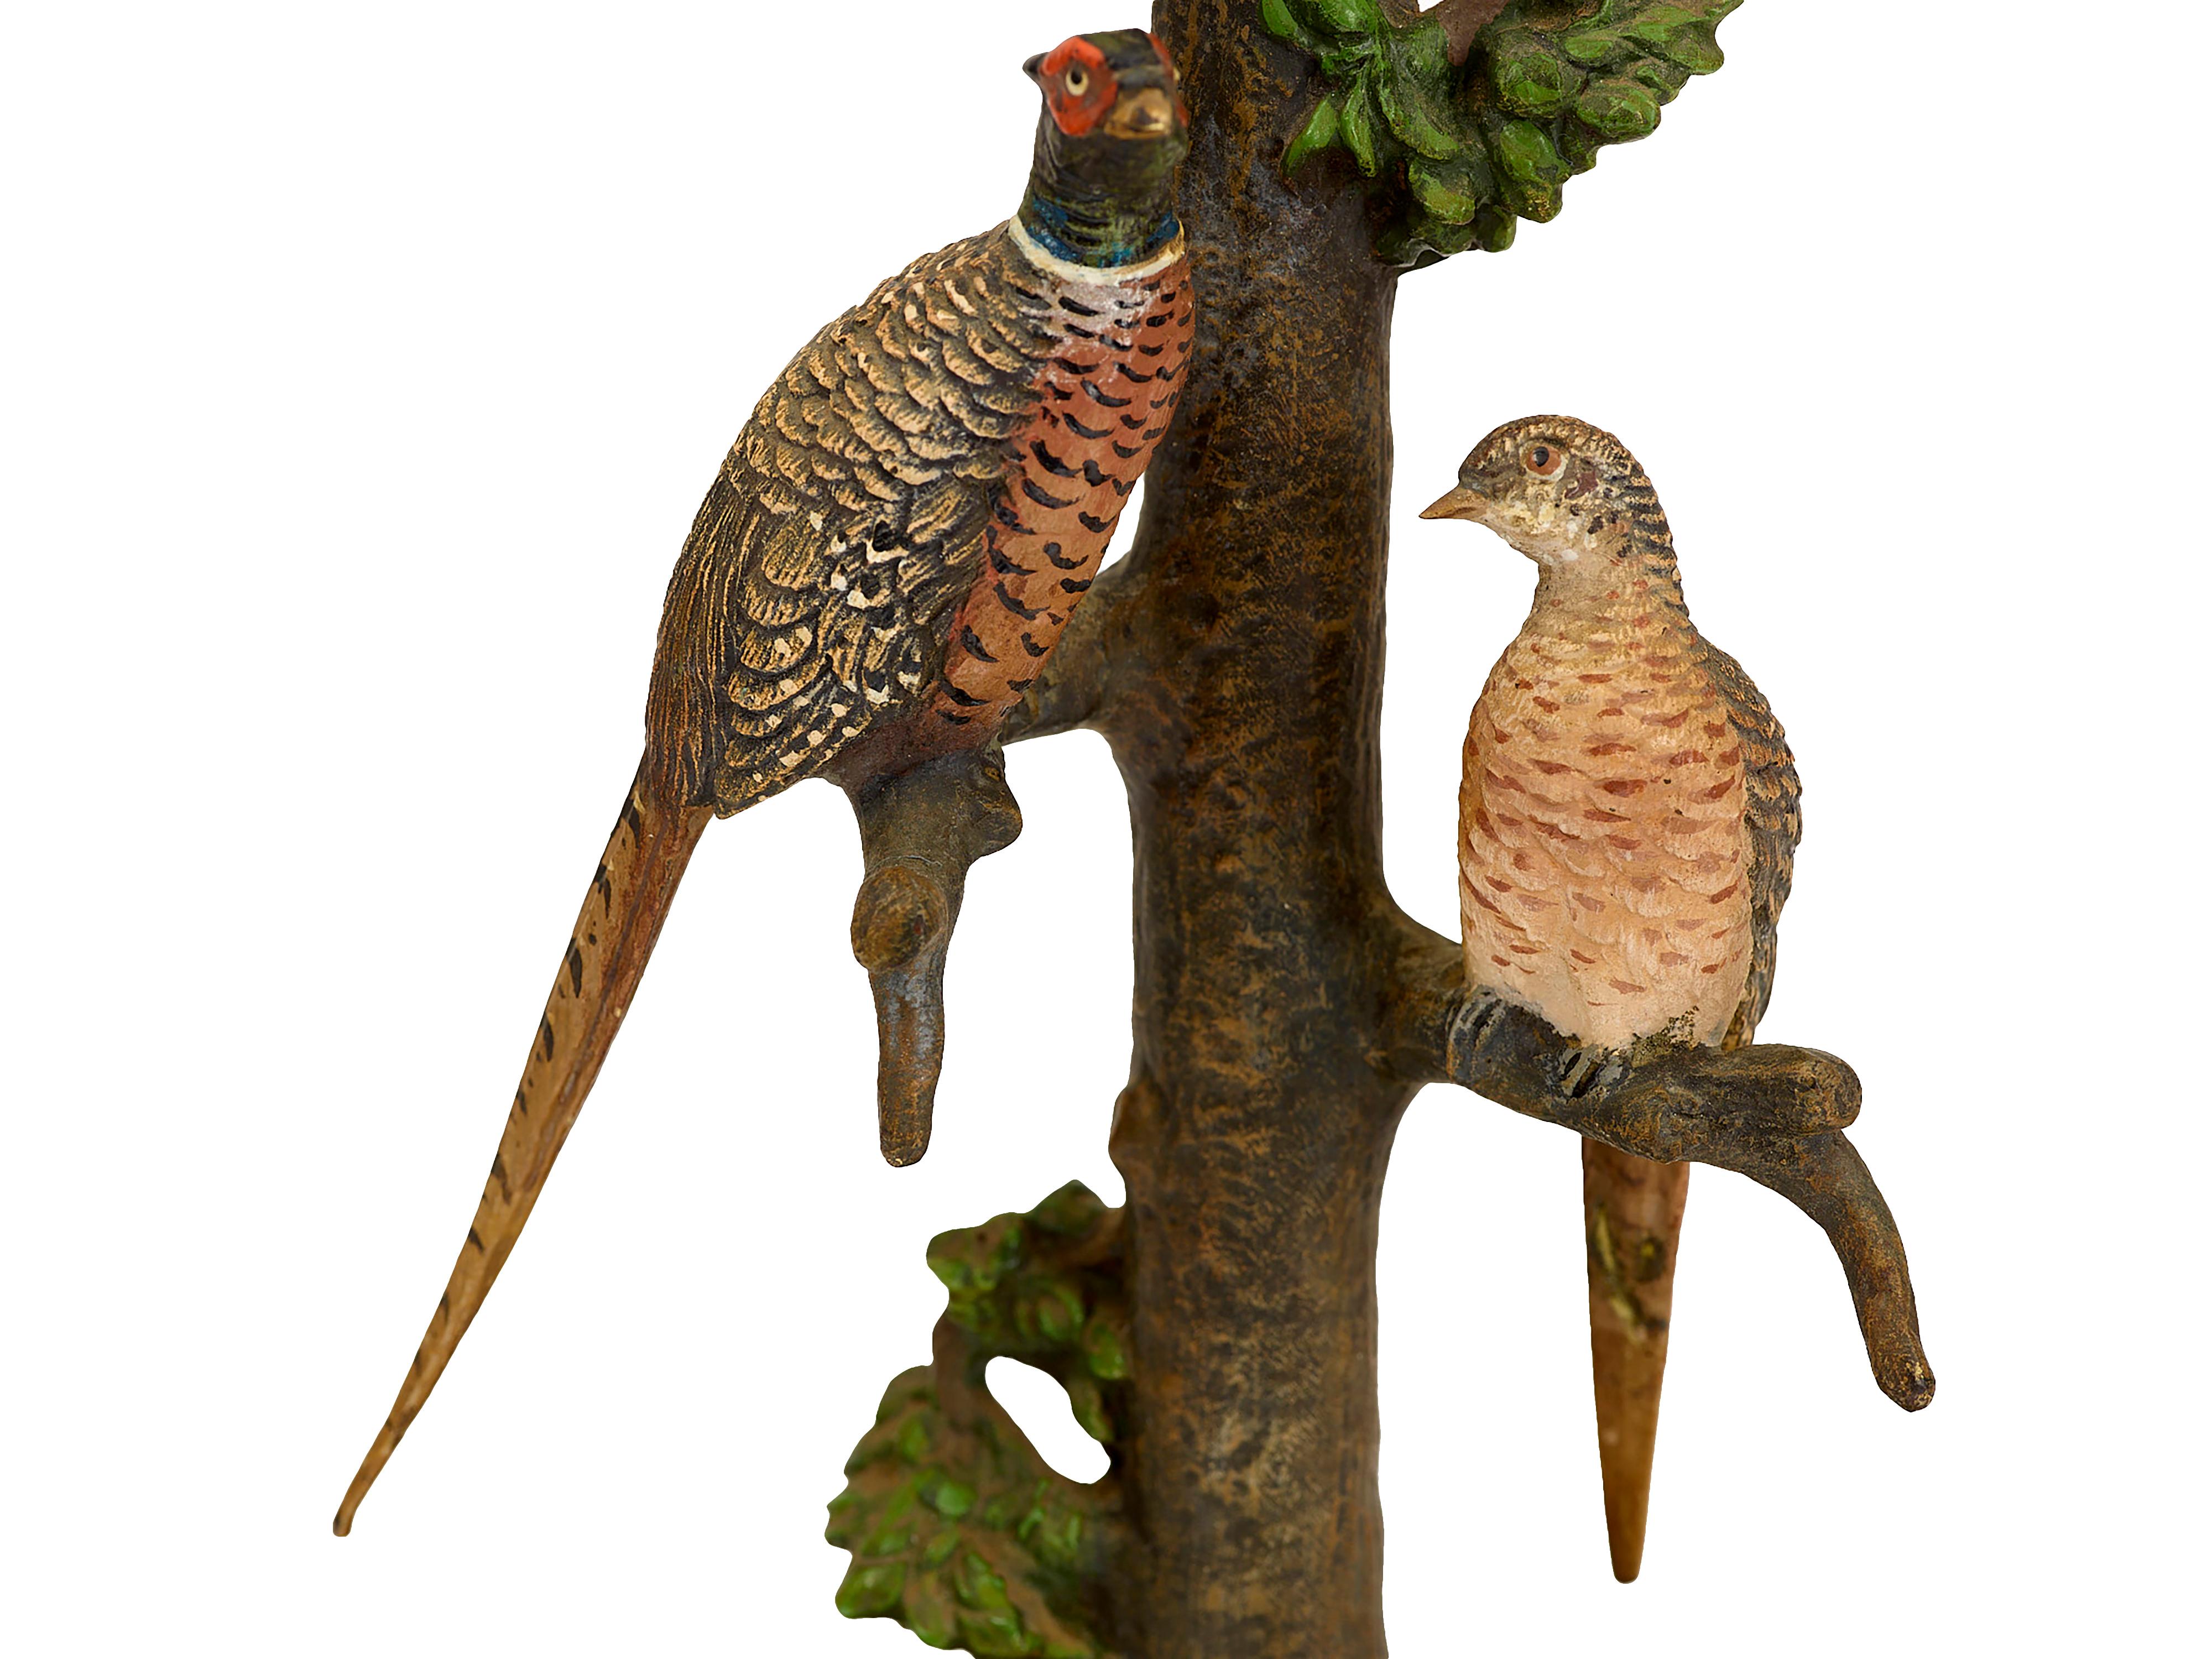 Cold painted Vienna bronze lamp supports on onyx bases
Depicting a pair of cock and hen pheasants, and a pair of budgerigars in trees. 
H 25, w 12.5, d 12 (each). Circa 1900. Germany